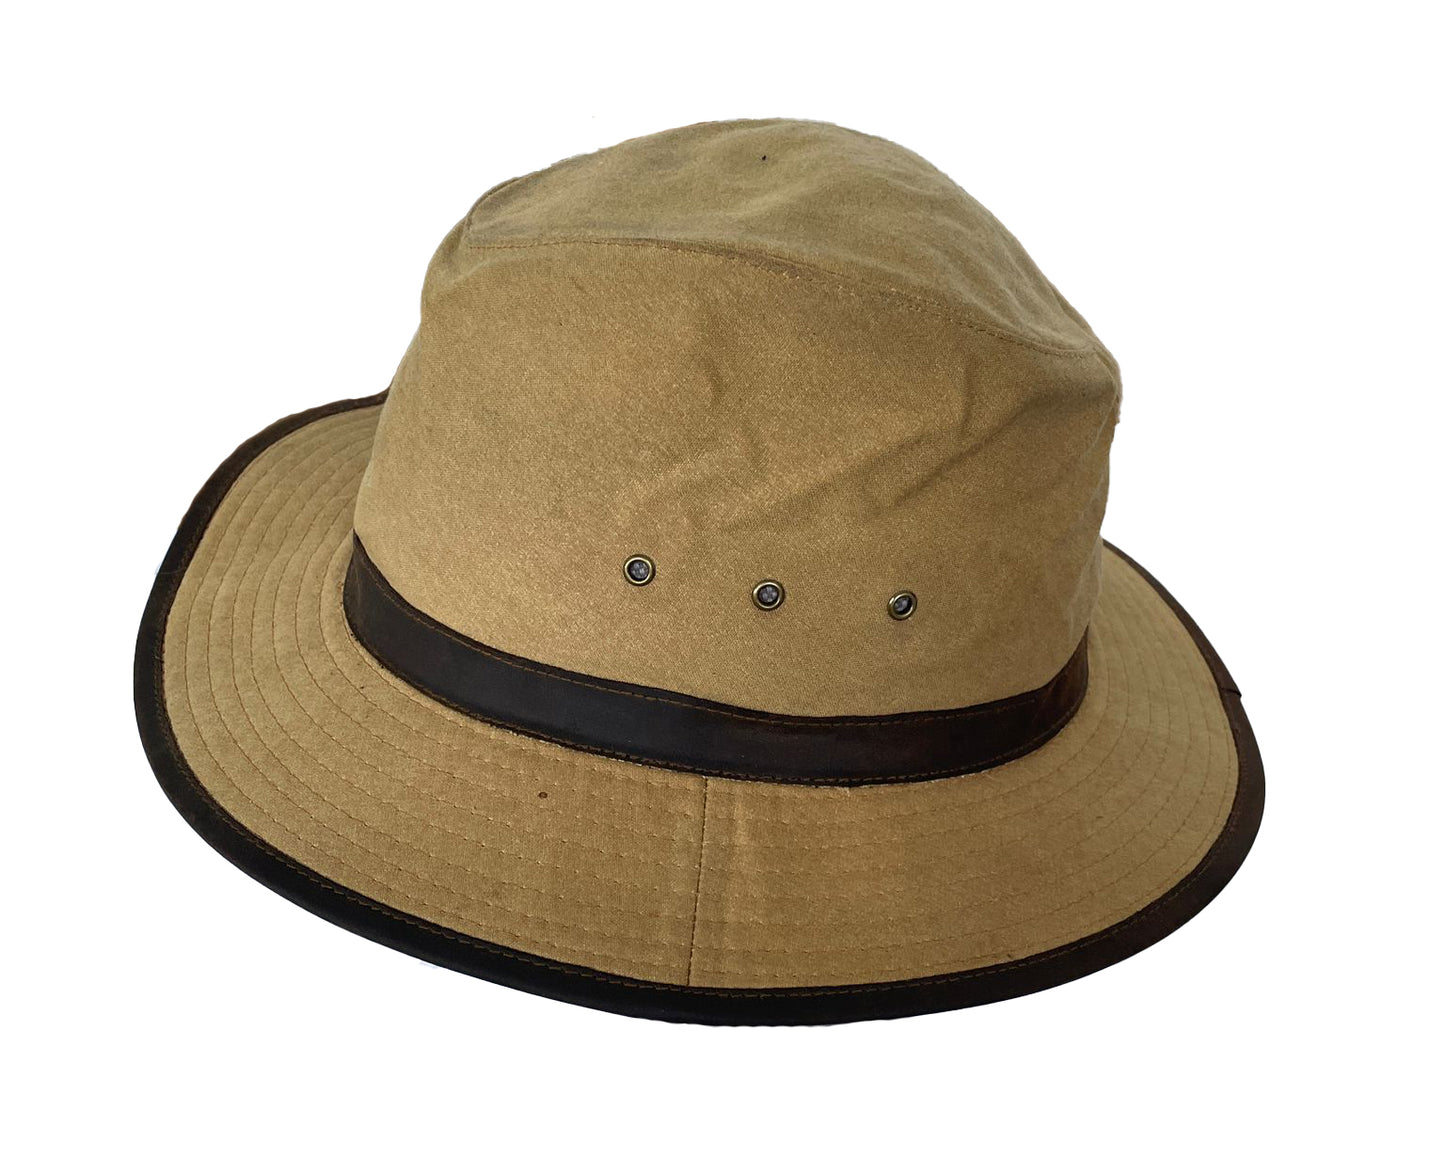 crumplable angler outdoor hat made of oiled cotton | Water and wind-repellent